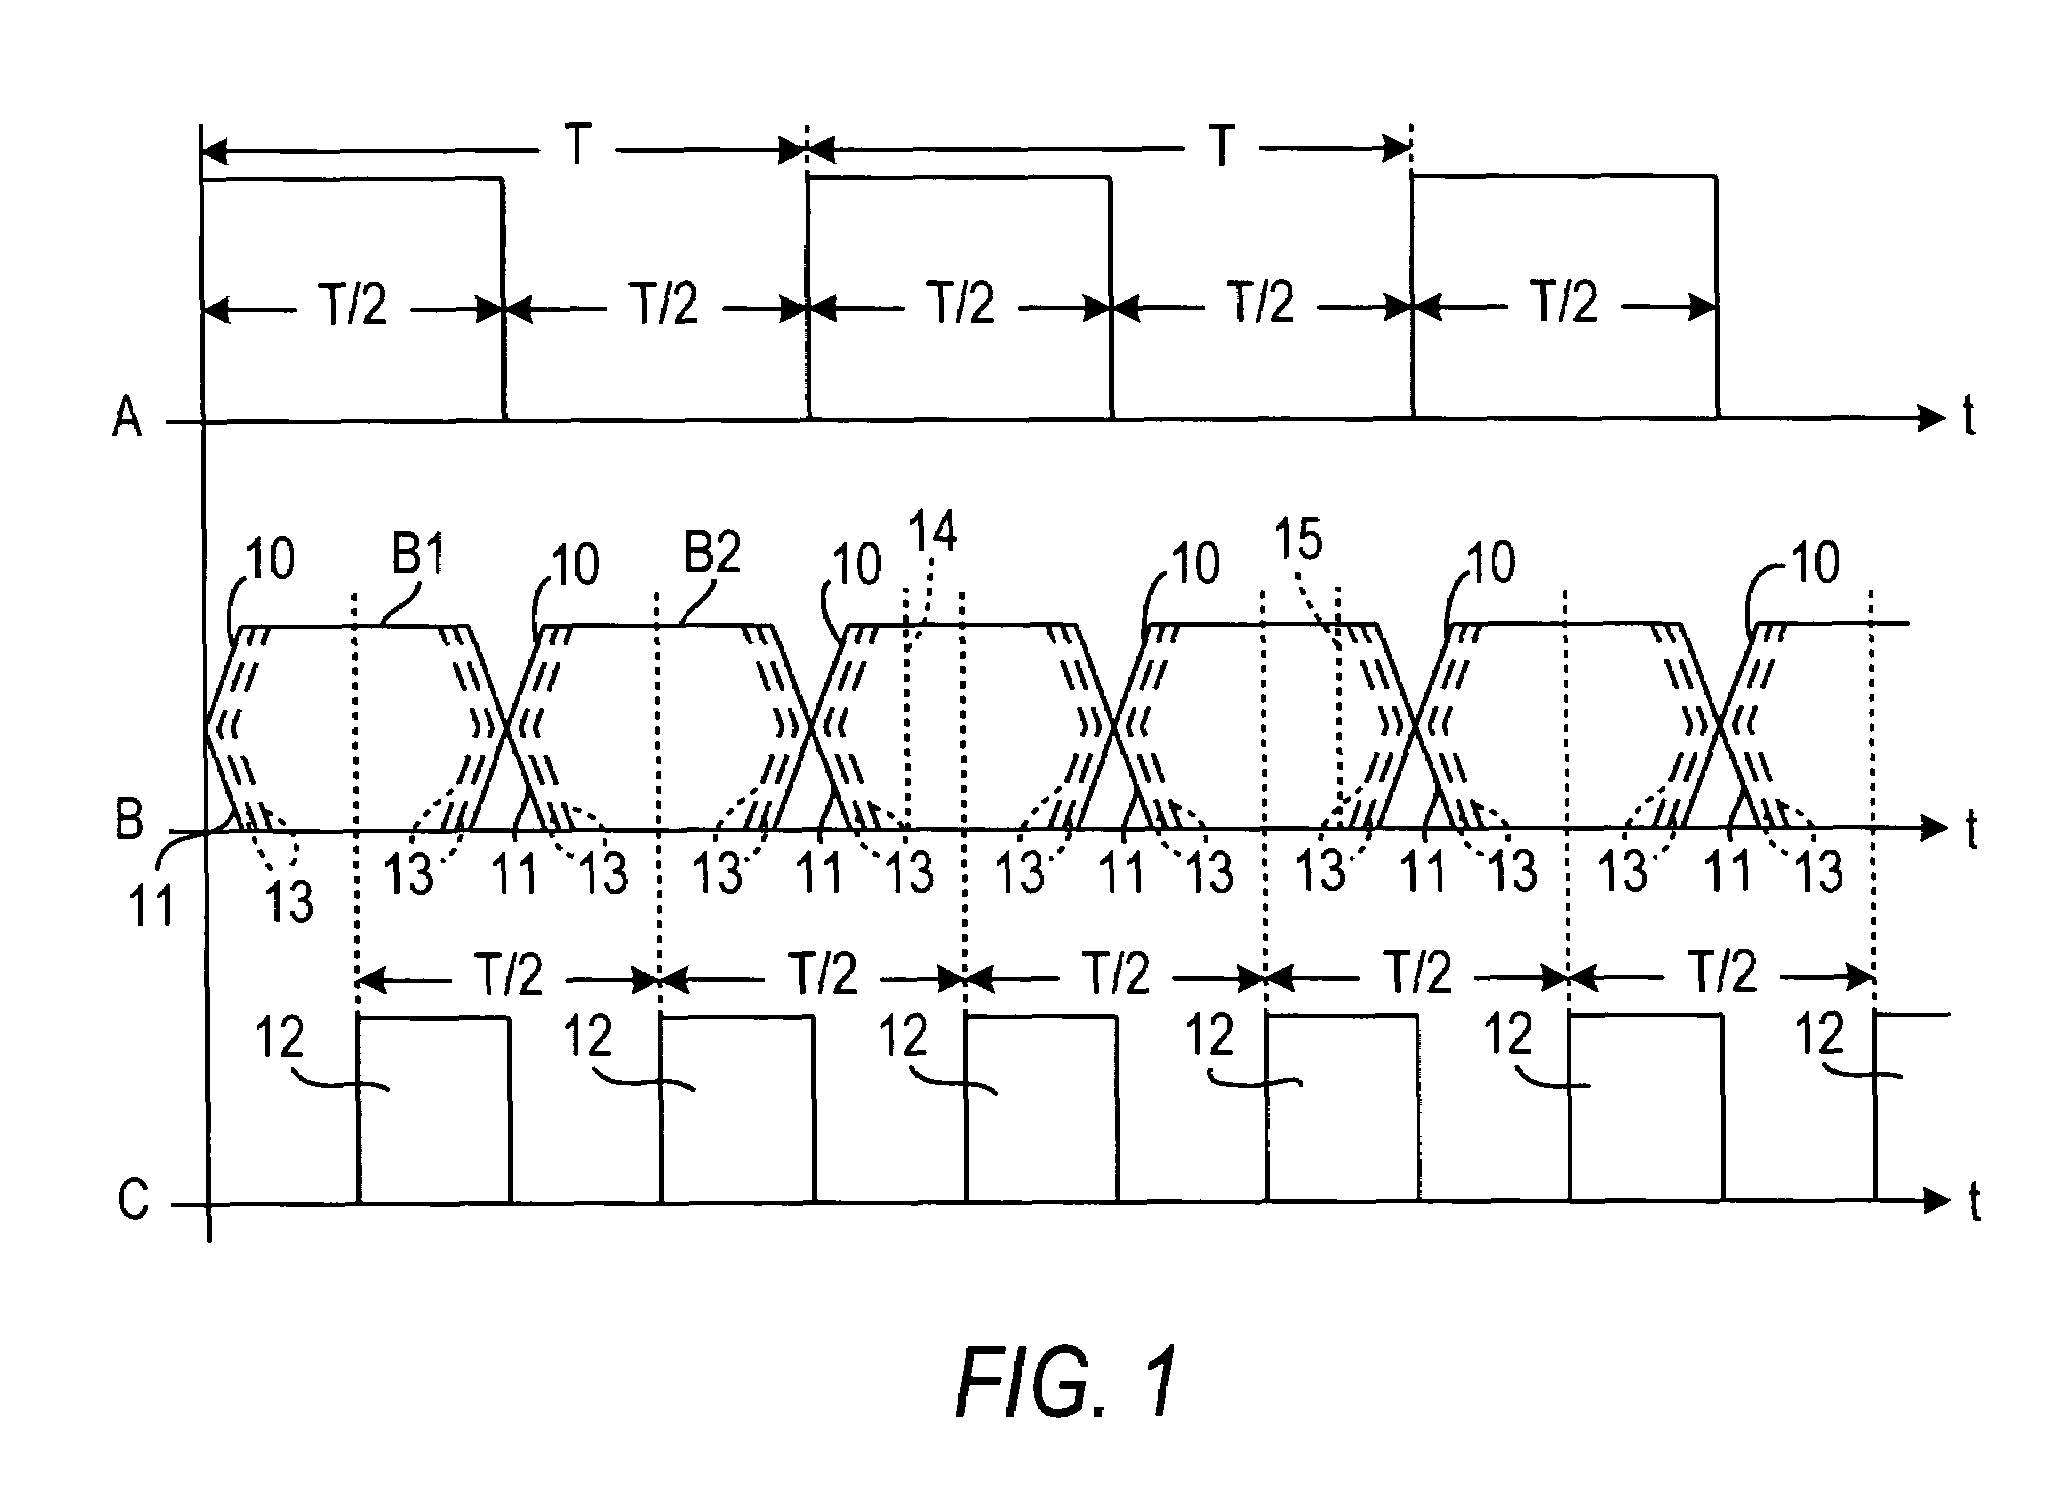 Alignment of clock signal with data signal